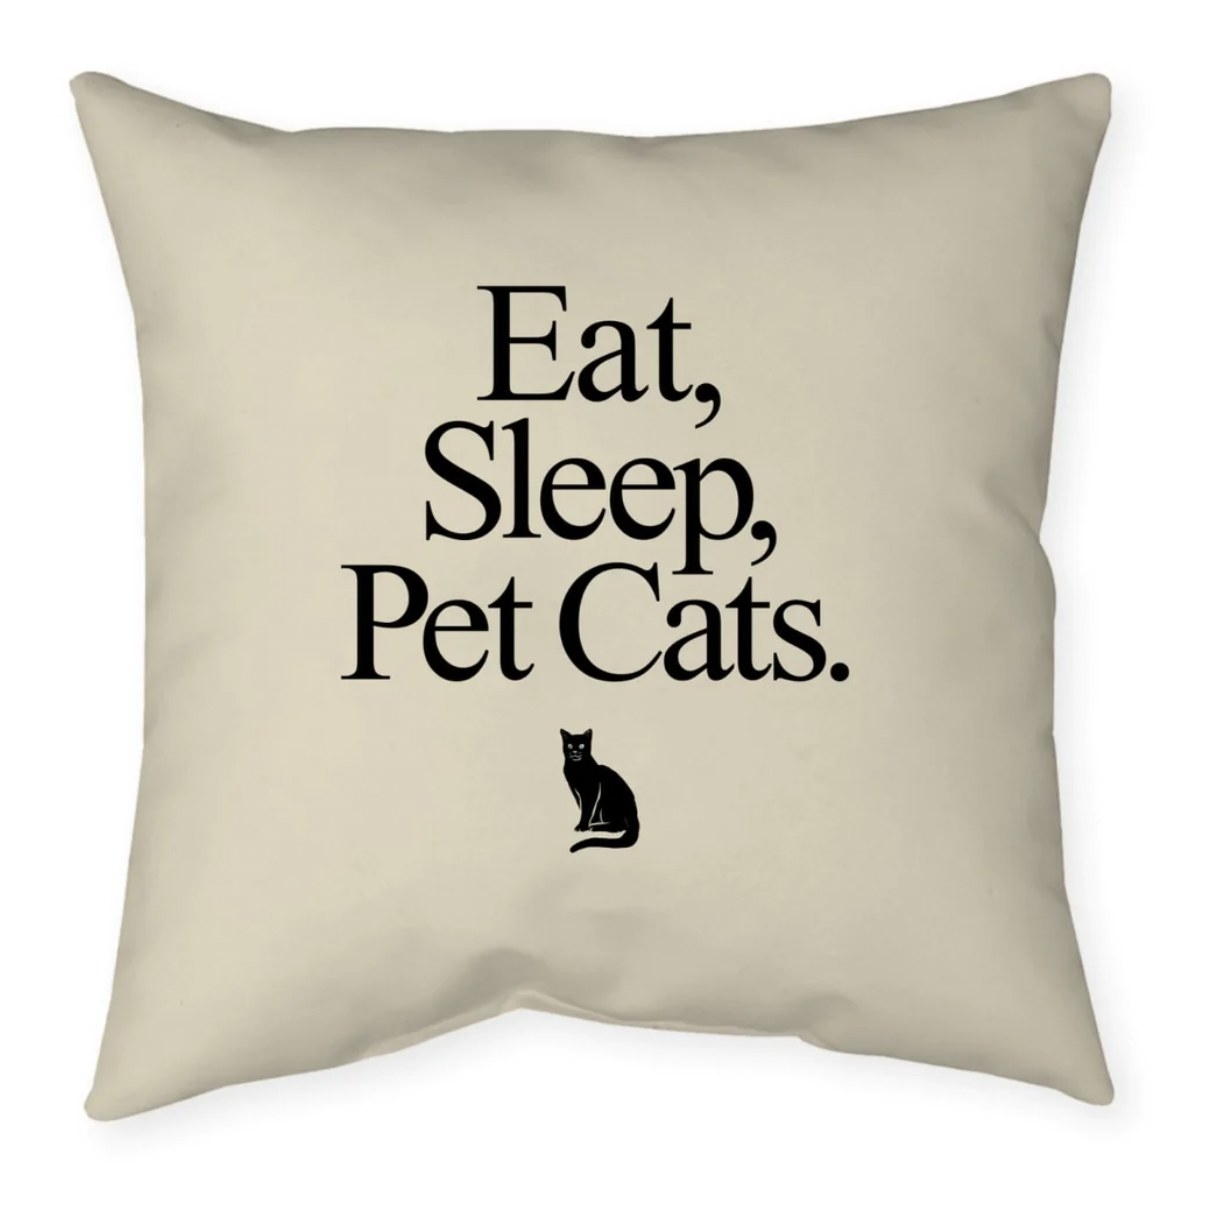 The beige pillow reading Eat, Sleep, Pet Cats. with small black cat beneath